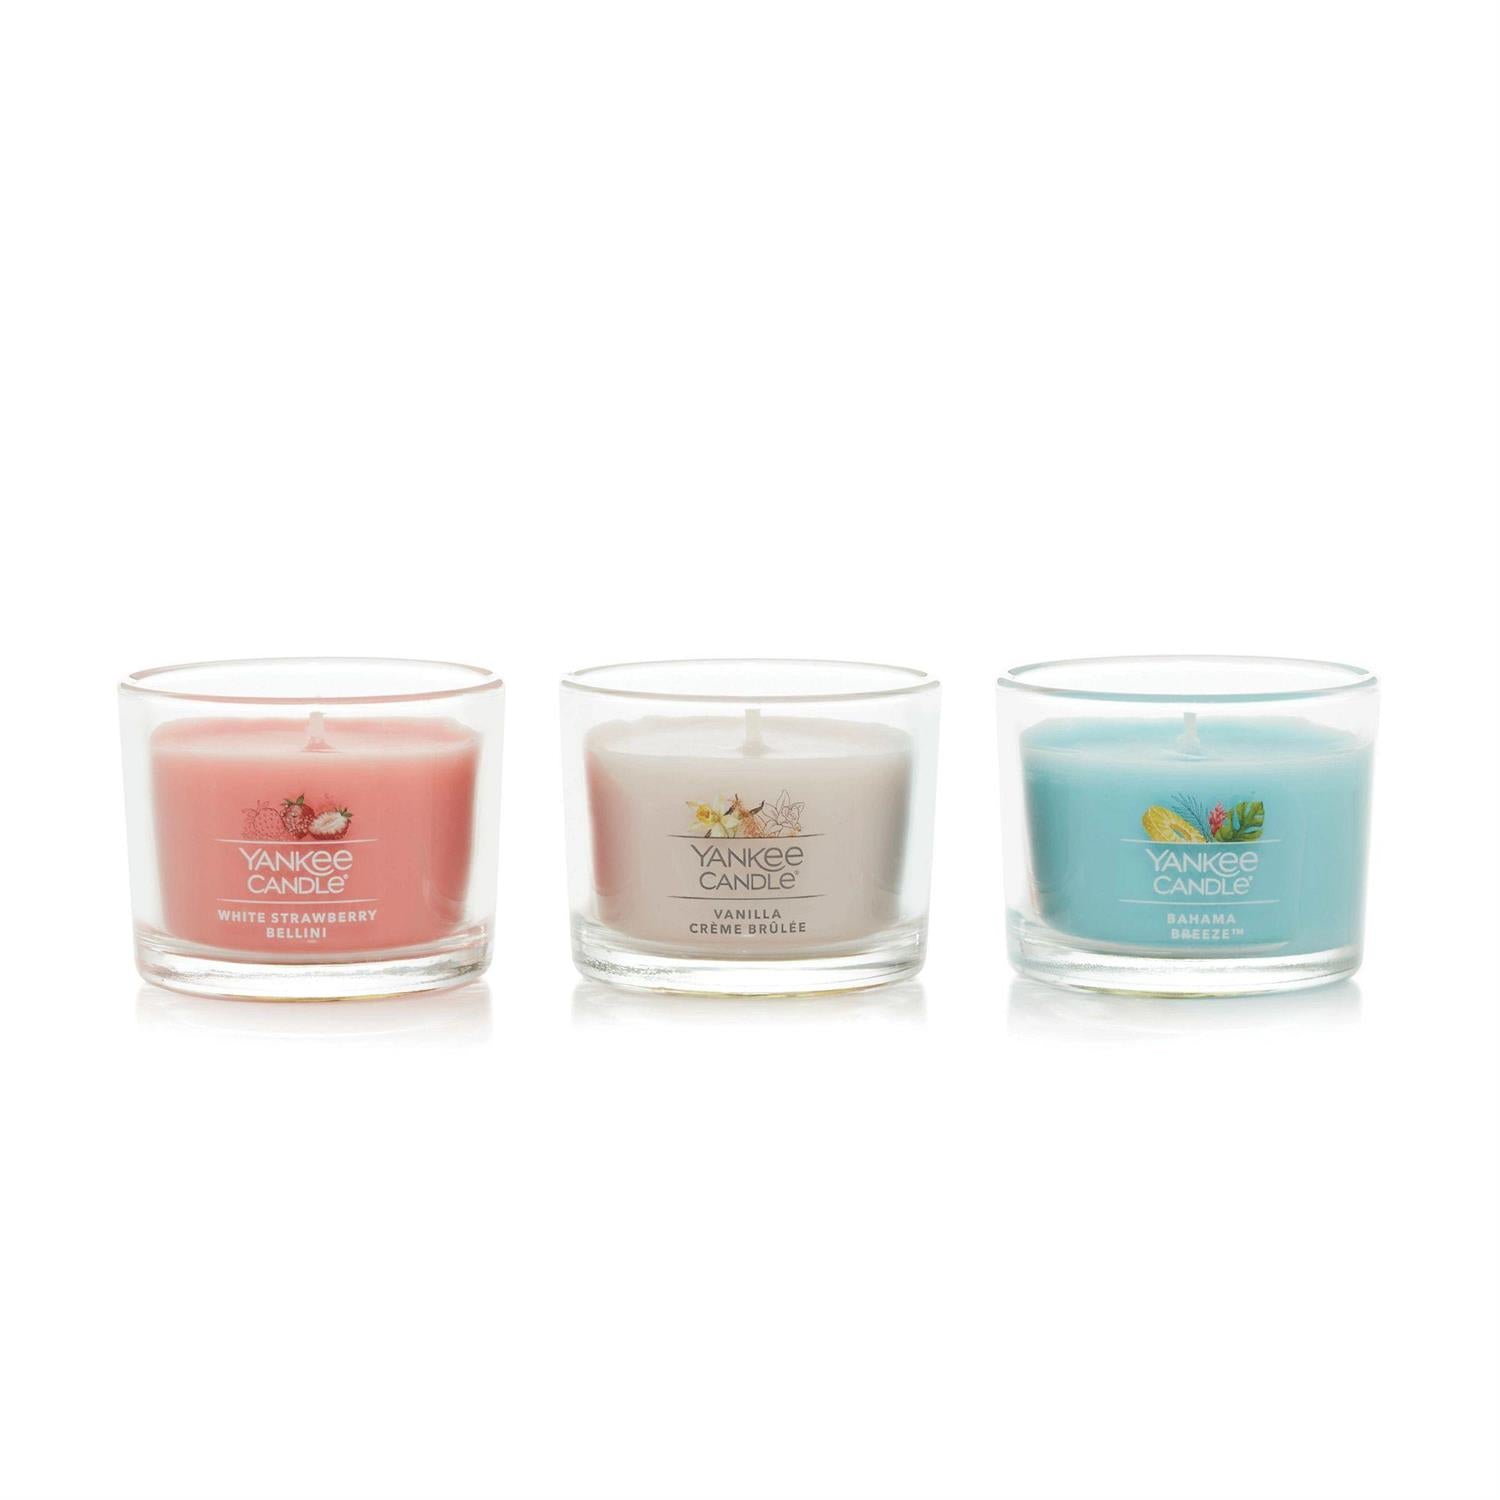 Cocktails & Confections Mini Candle Set - Yankee Candle Minis